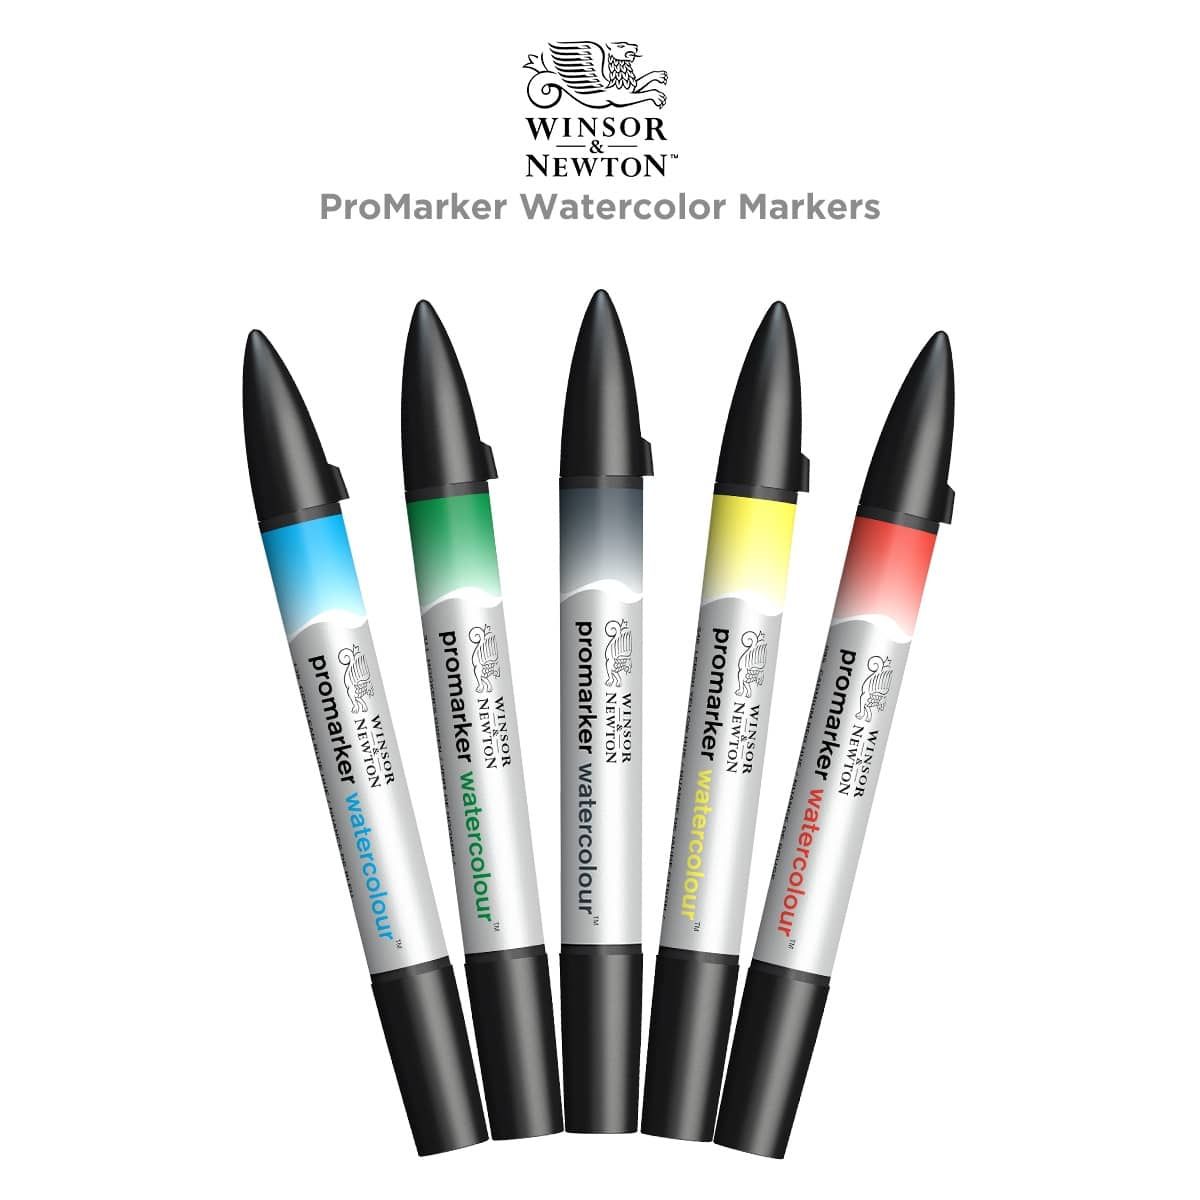 Winsor & Newton ProMarker Watercolor Marker's are highly pigmented